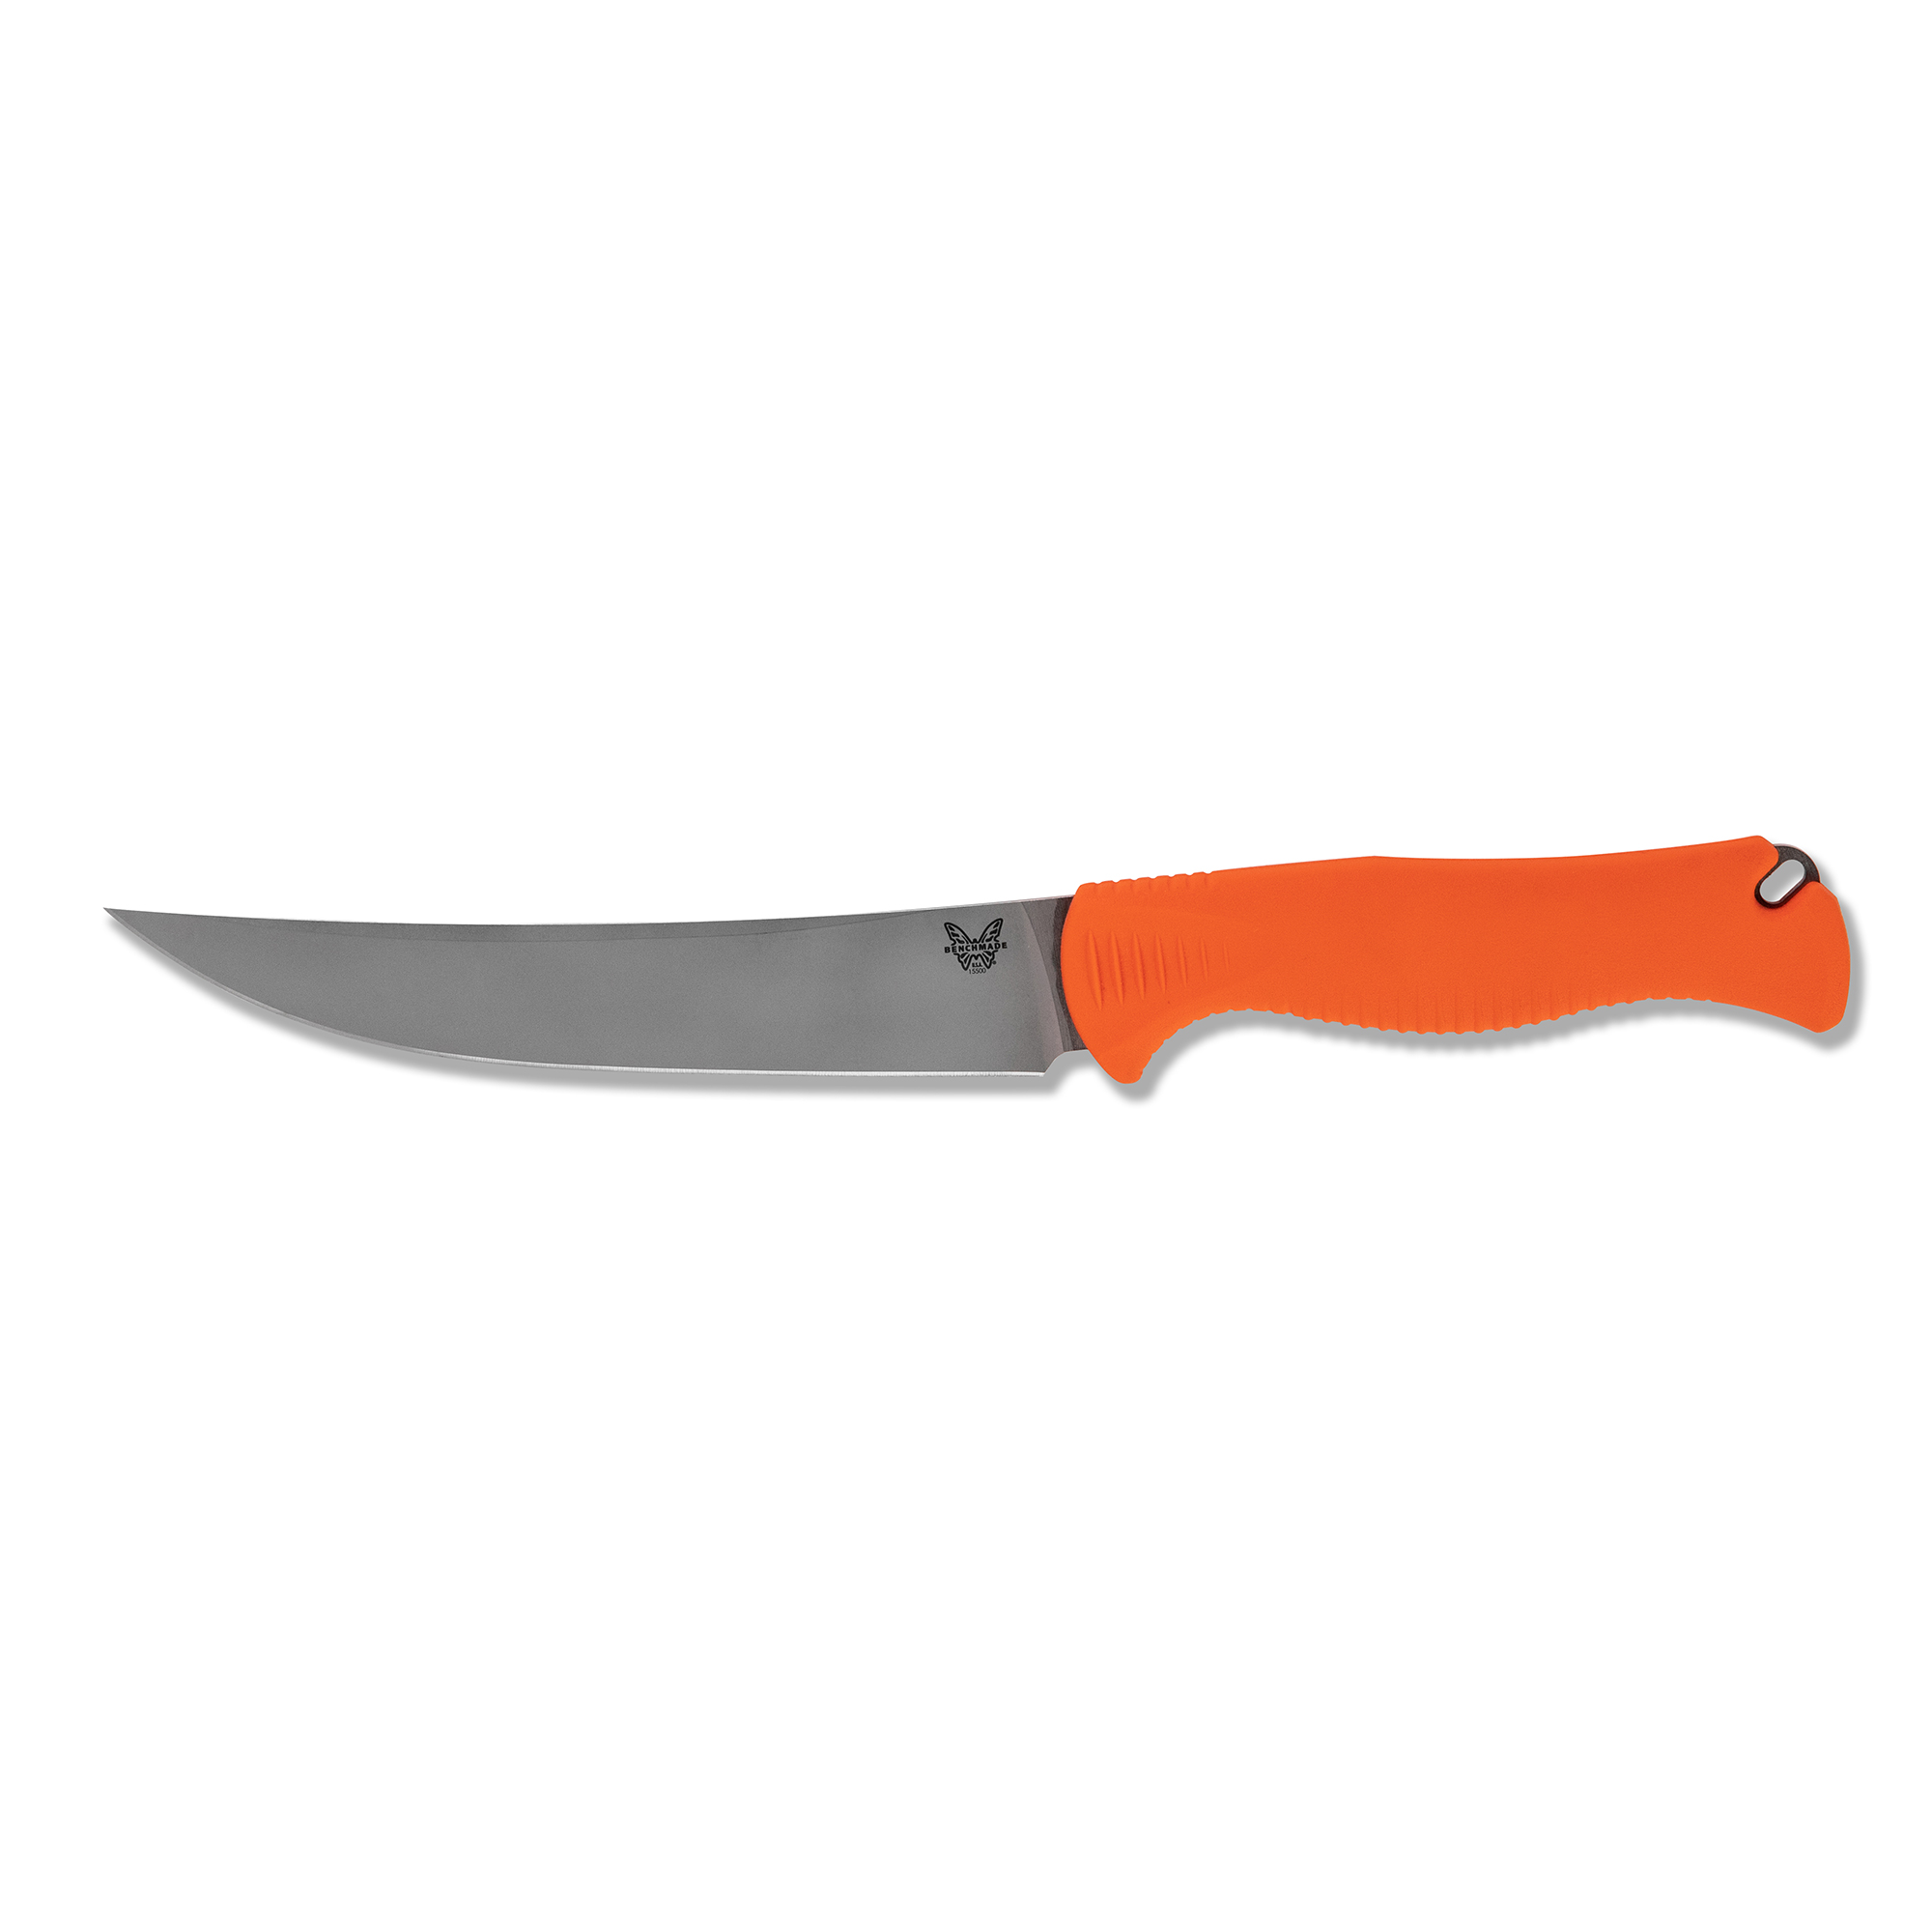 Benchmade Meatcrafter Knife Review - Pro Tool Reviews